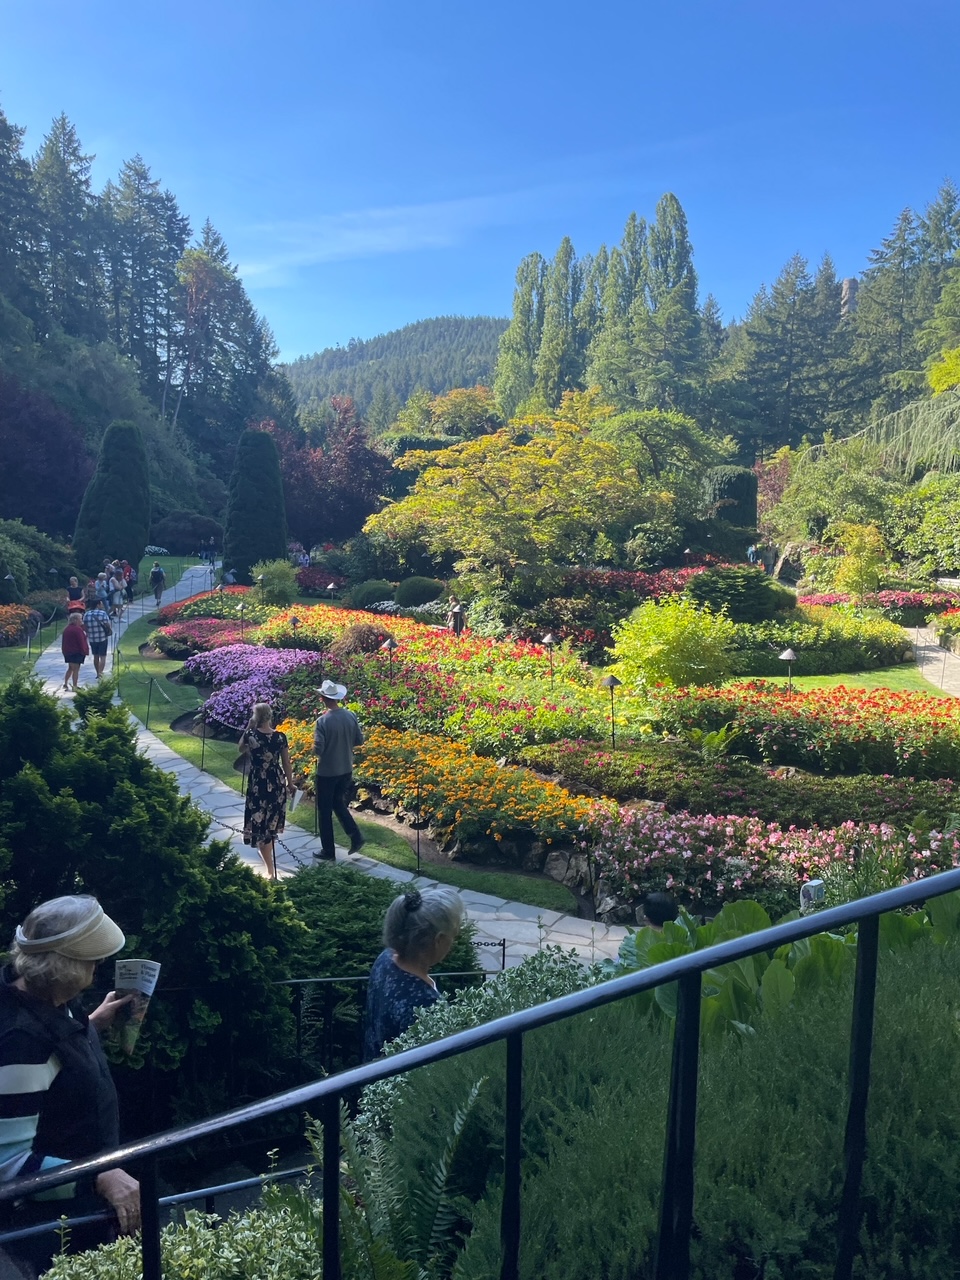 Some of Victoria's gardens